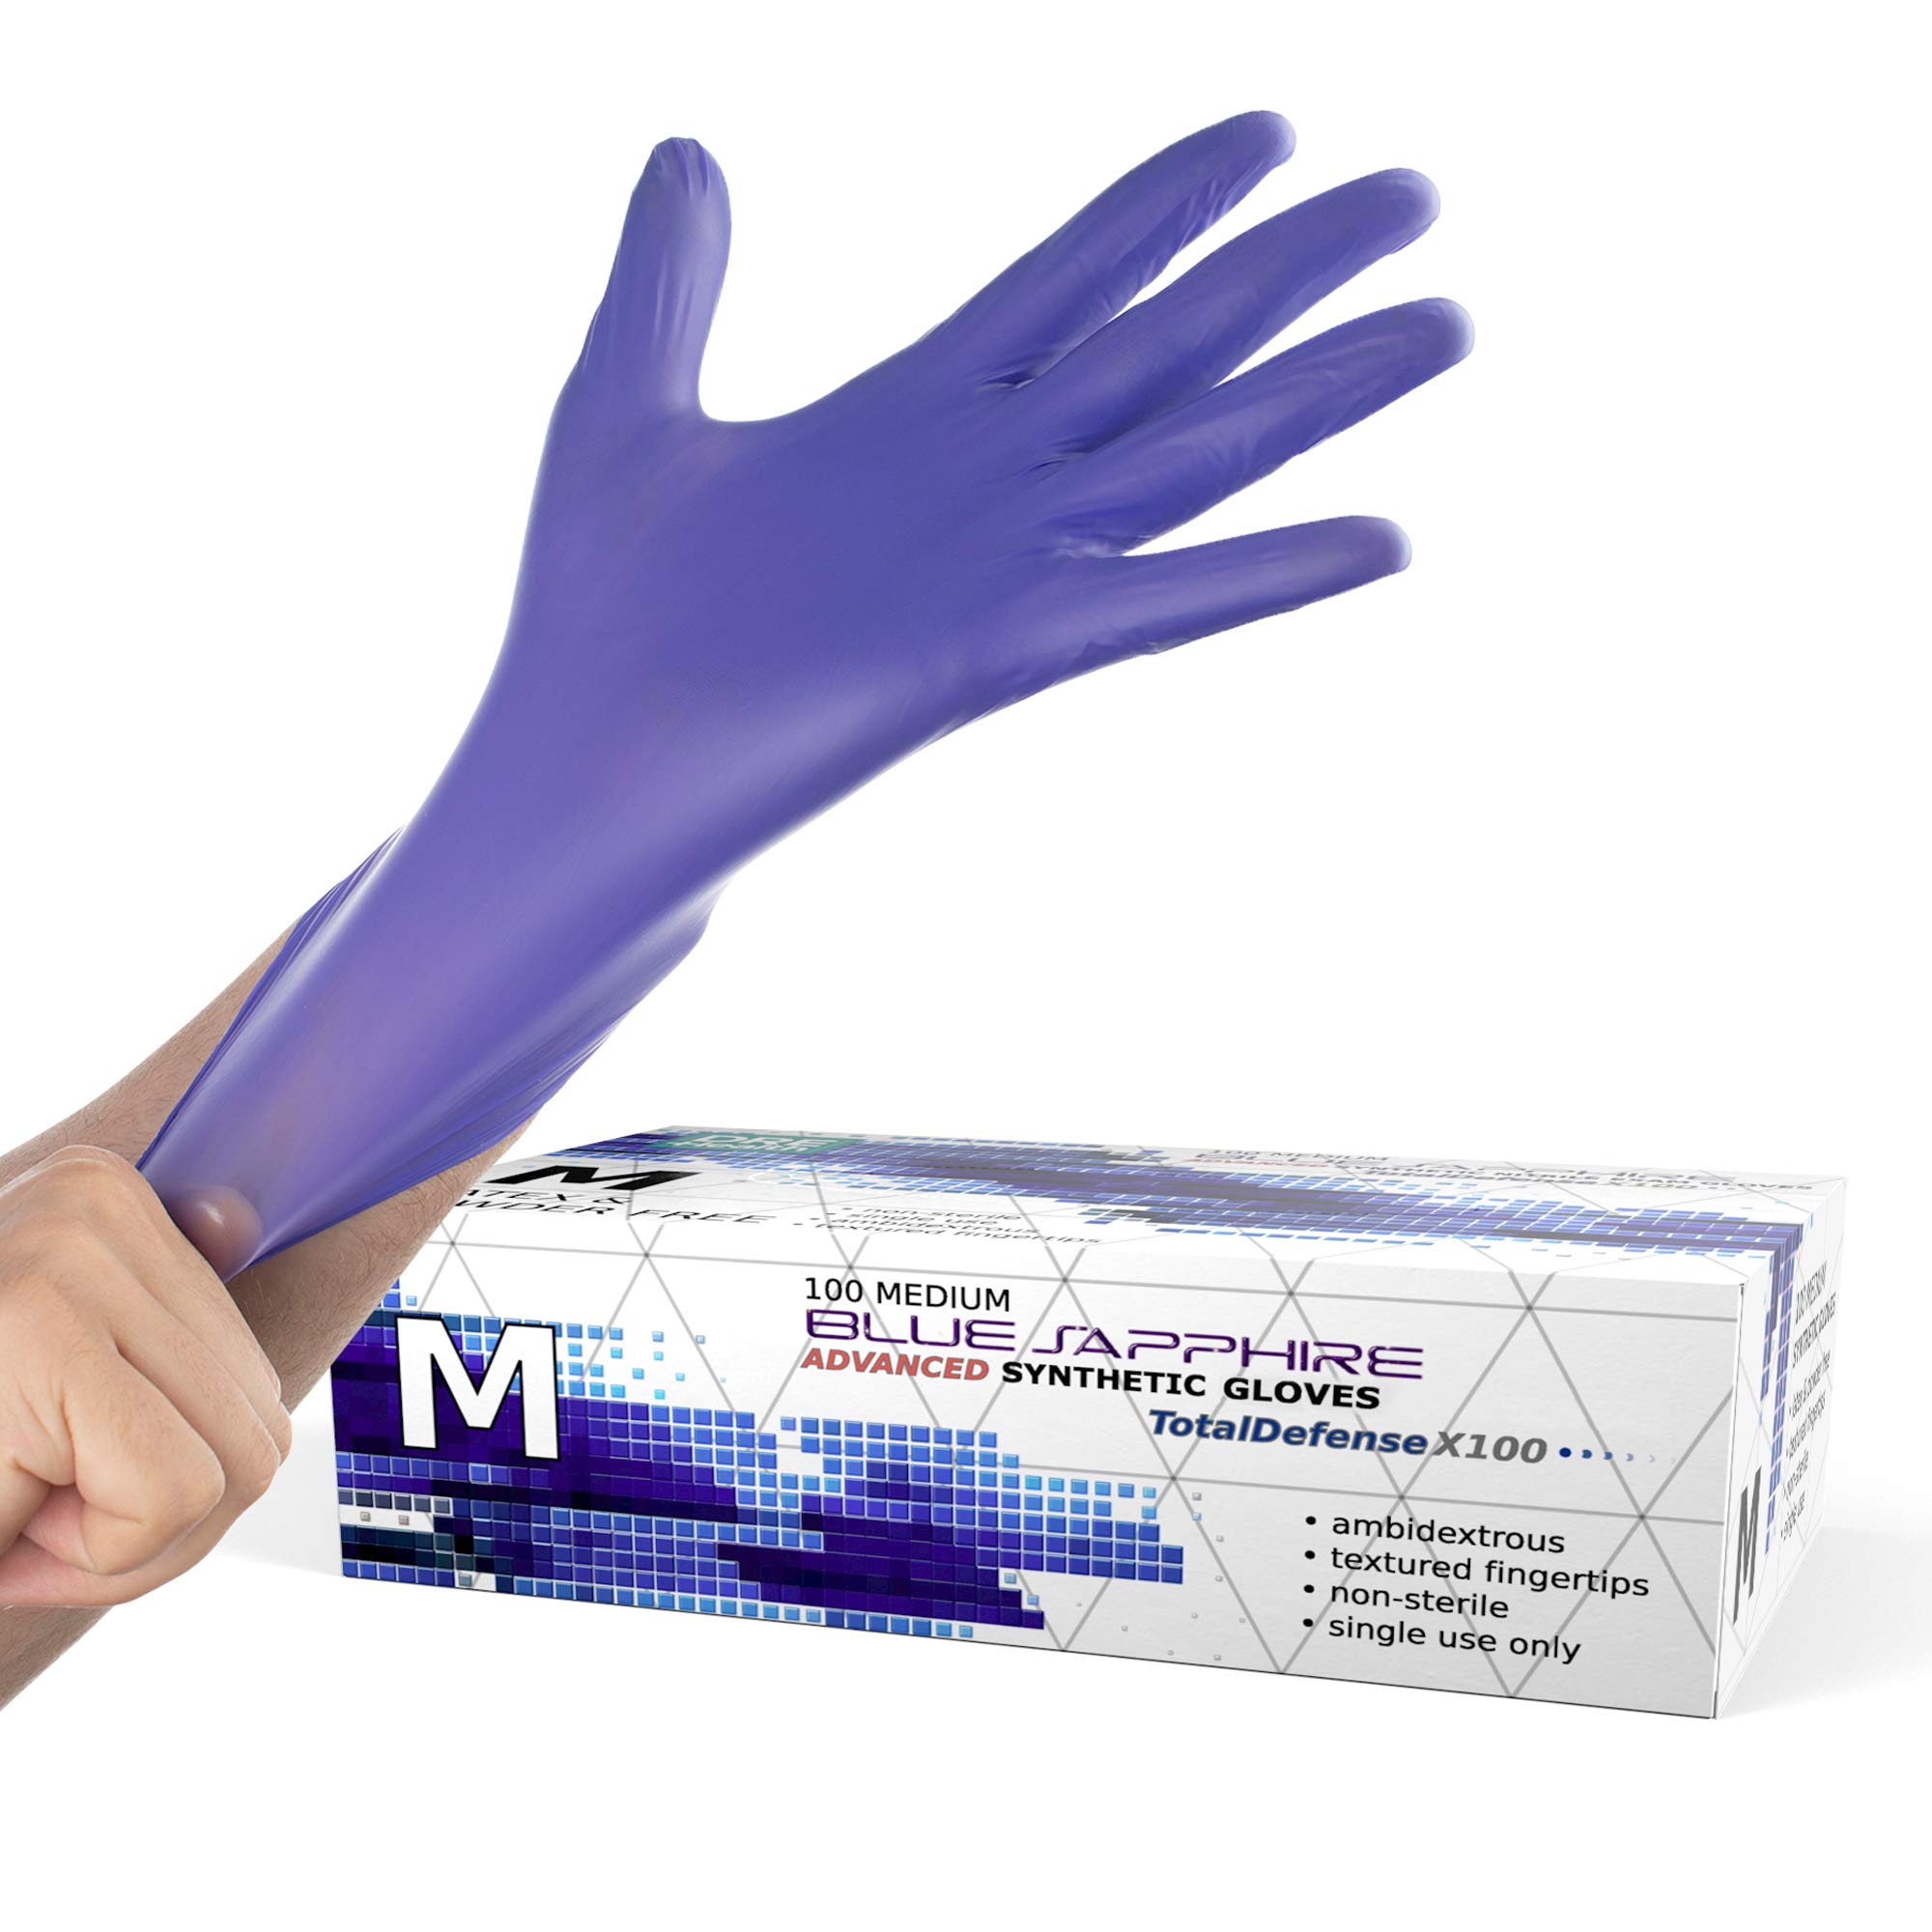 Synthetic Nitrile Disposable Gloves Medium -100 Pack -Latex Free Medical Gloves